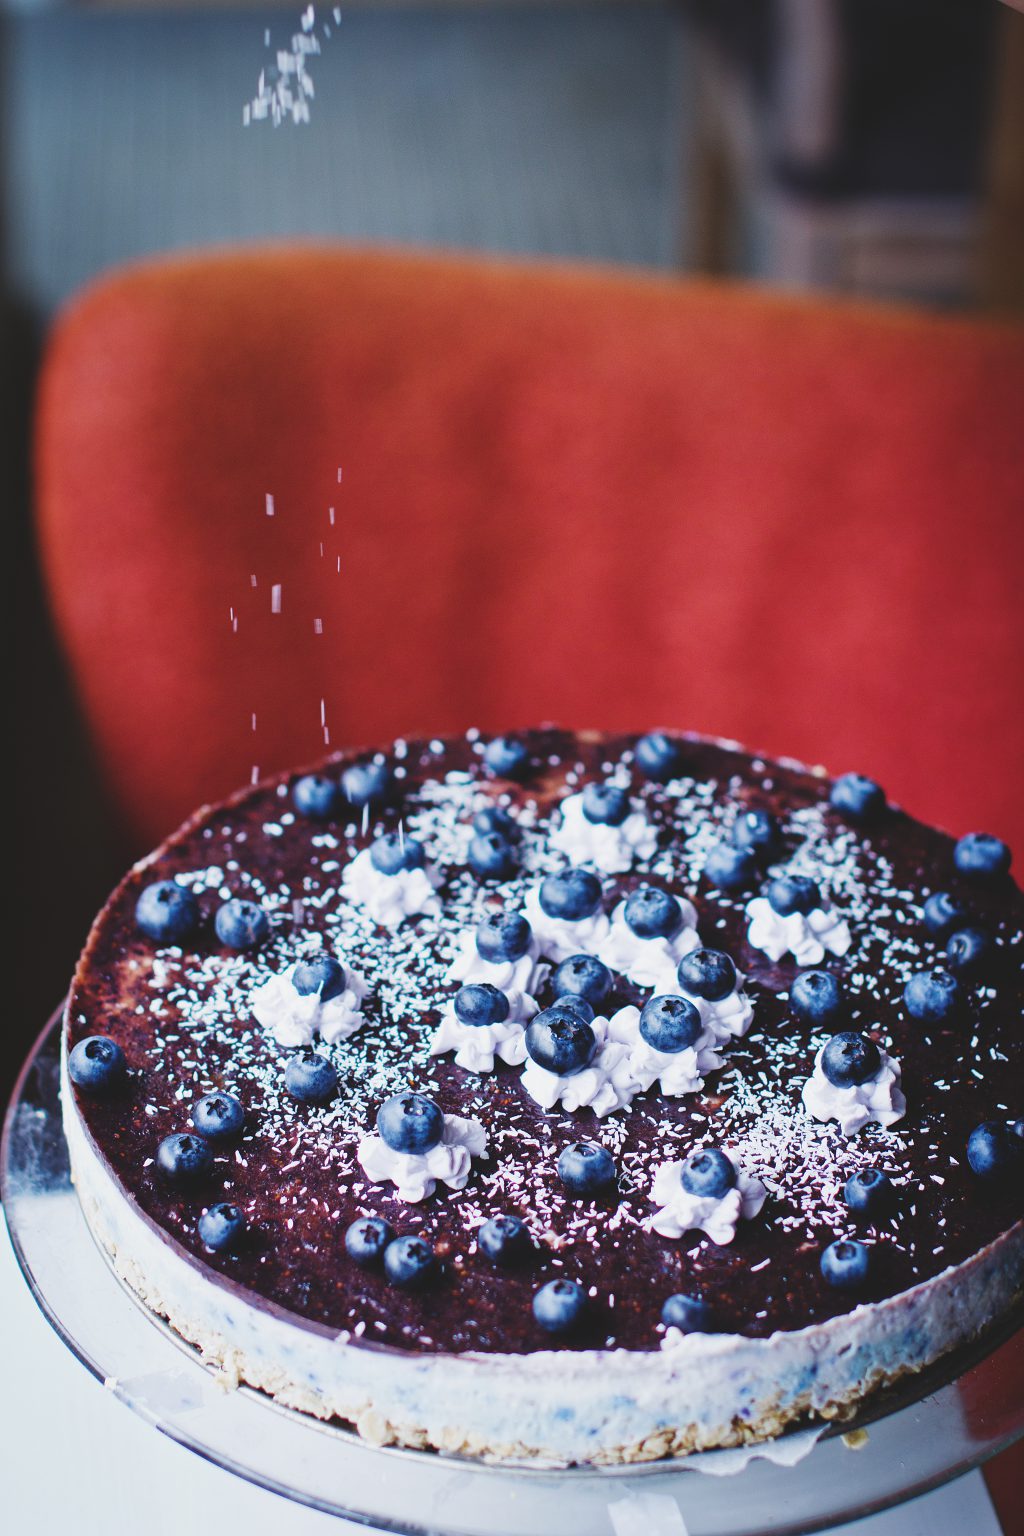 Coconut and blueberry cheesecake 2 - free stock photo